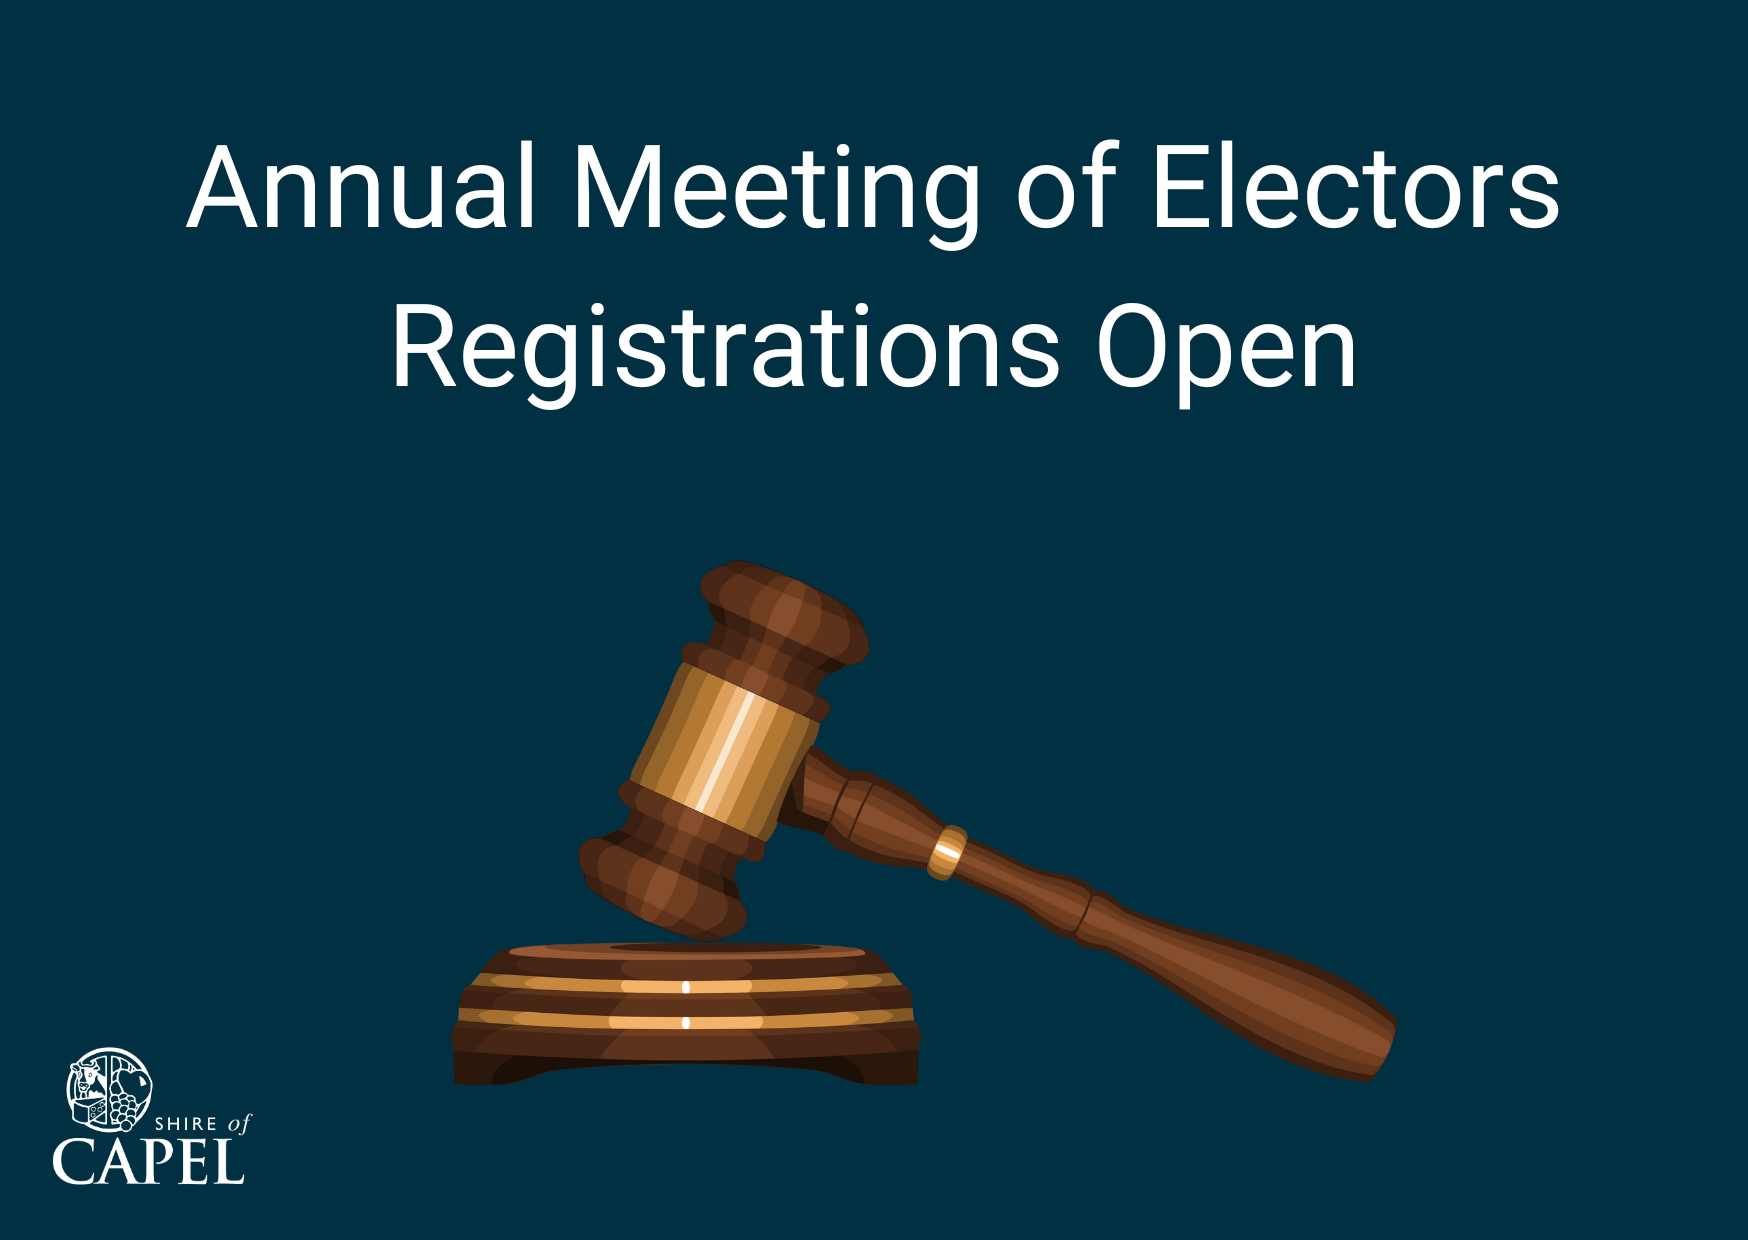 Registrations are now open for the General Meeting of Electors .